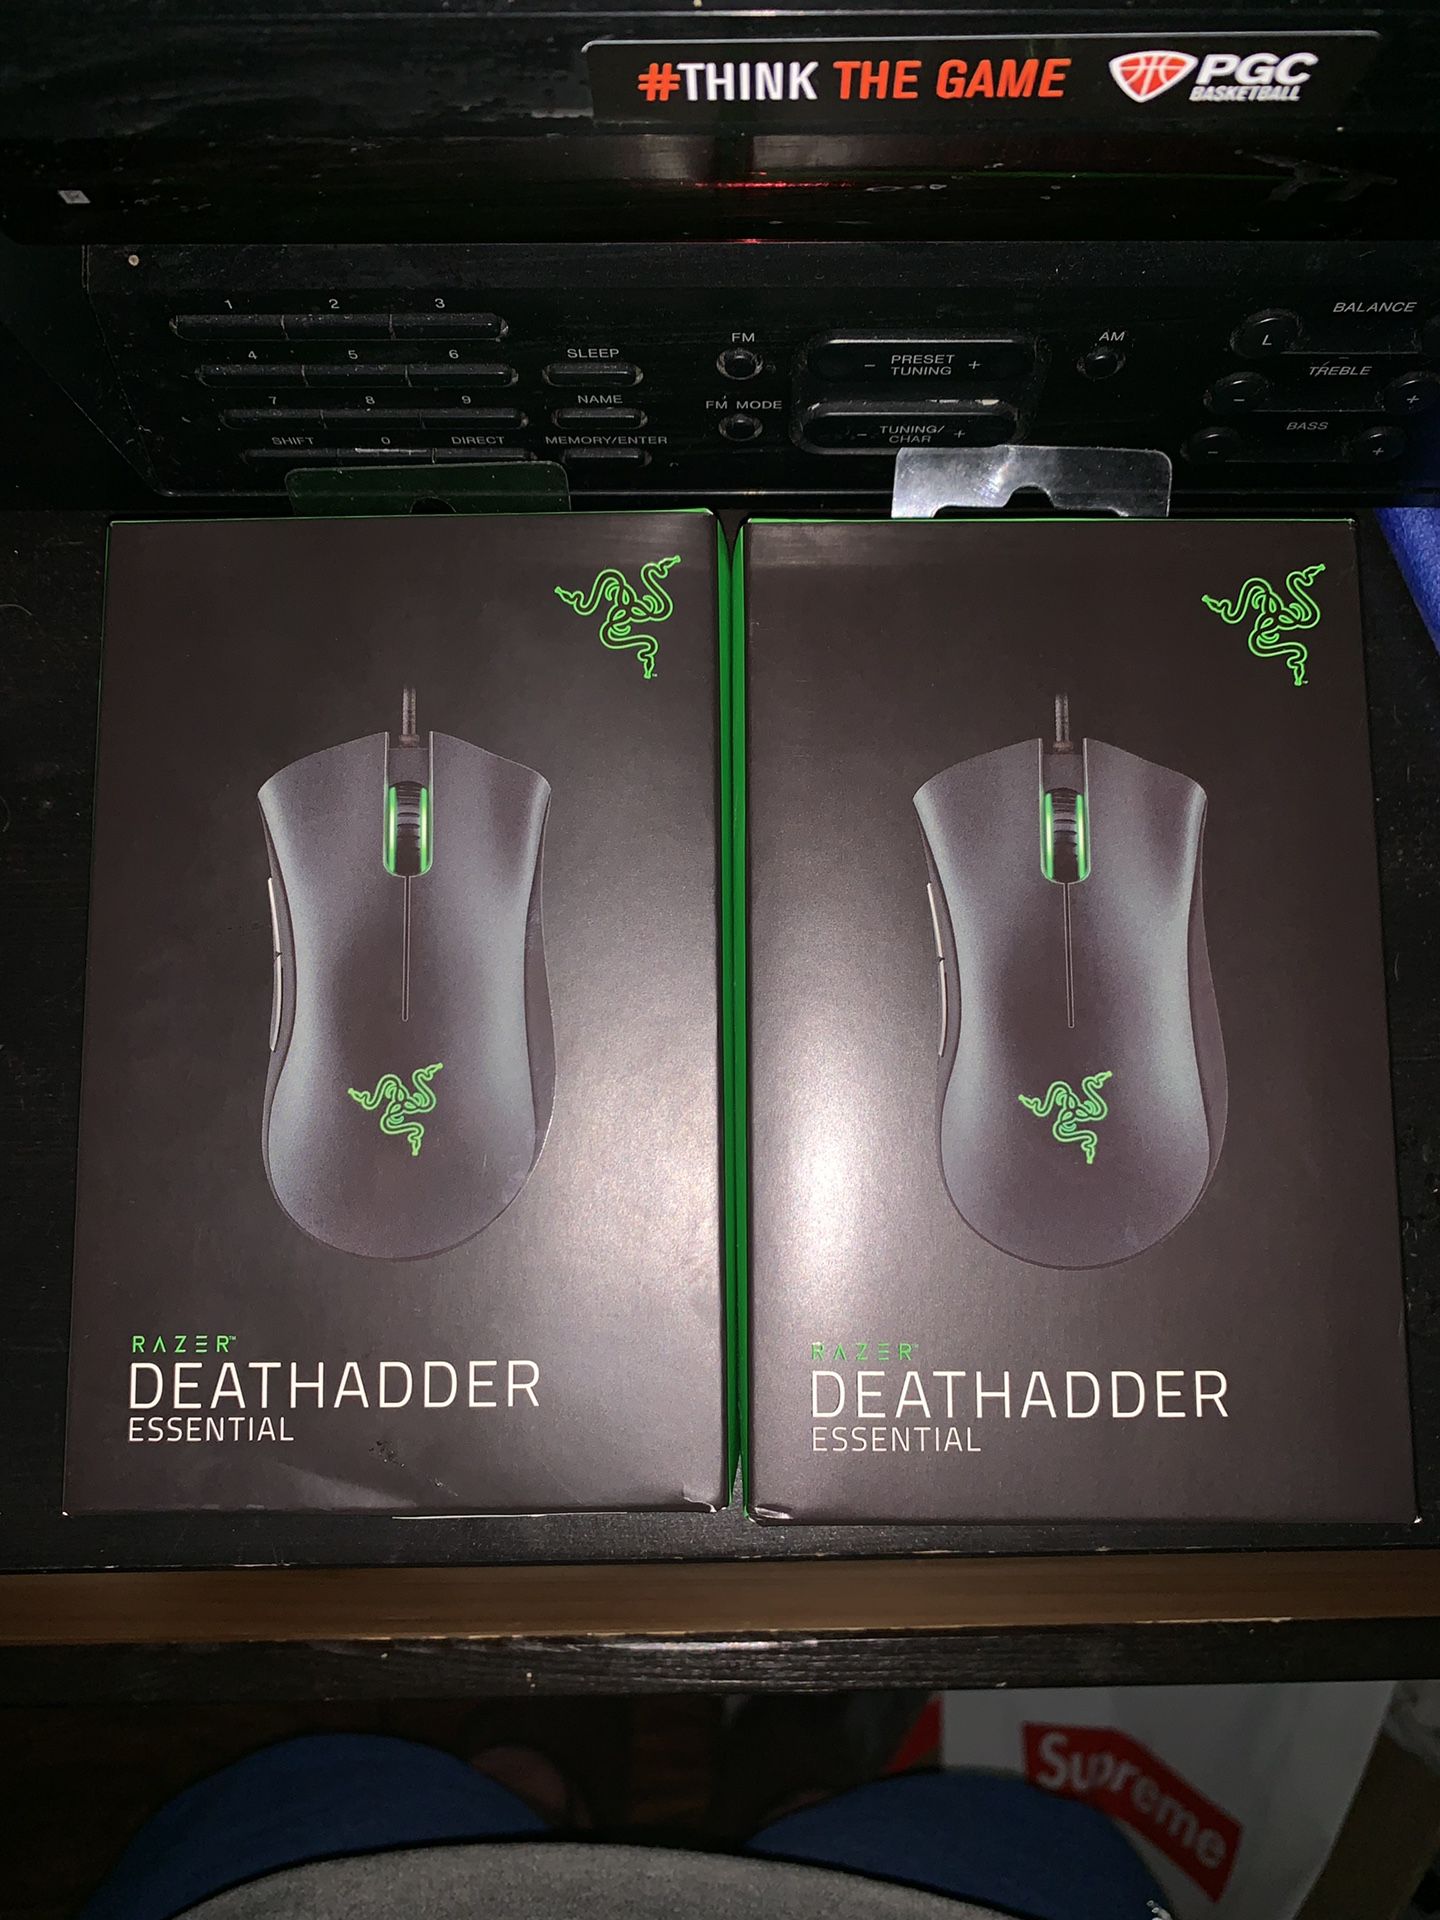 Razer deathadder professional gaming mouse